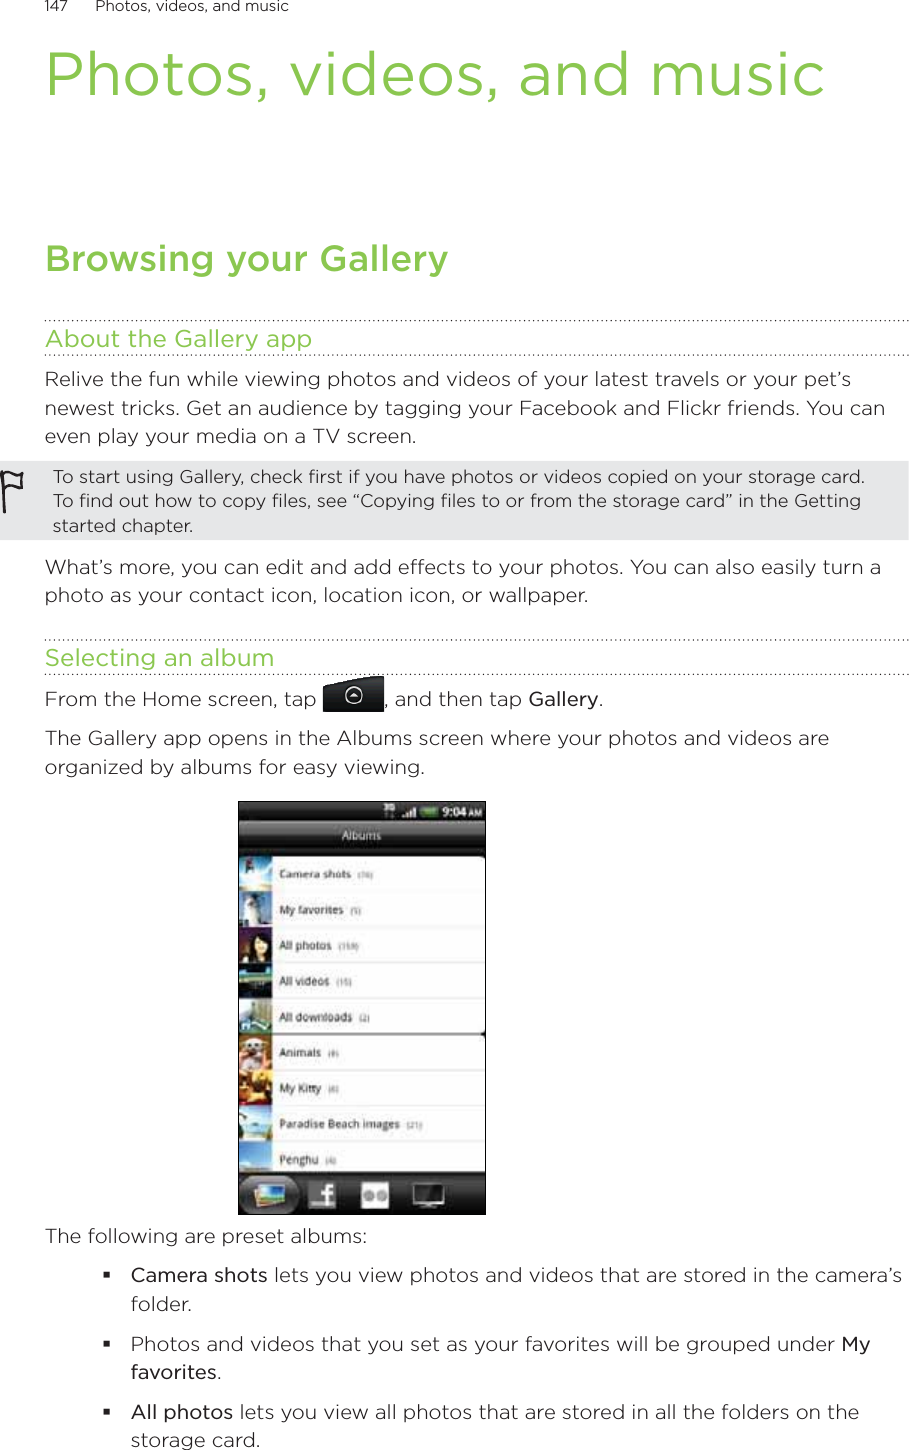 147      Photos, videos, and music      Photos, videos, and musicBrowsing your GalleryAbout the Gallery appRelive the fun while viewing photos and videos of your latest travels or your pet’s newest tricks. Get an audience by tagging your Facebook and Flickr friends. You can even play your media on a TV screen.To start using Gallery, check first if you have photos or videos copied on your storage card. To find out how to copy files, see “Copying files to or from the storage card” in the Getting started chapter.What’s more, you can edit and add effects to your photos. You can also easily turn a photo as your contact icon, location icon, or wallpaper.Selecting an albumFrom the Home screen, tap  , and then tap Gallery.The Gallery app opens in the Albums screen where your photos and videos are organized by albums for easy viewing.The following are preset albums:Camera shots lets you view photos and videos that are stored in the camera’s folder.Photos and videos that you set as your favorites will be grouped under My favorites.All photos lets you view all photos that are stored in all the folders on the storage card.